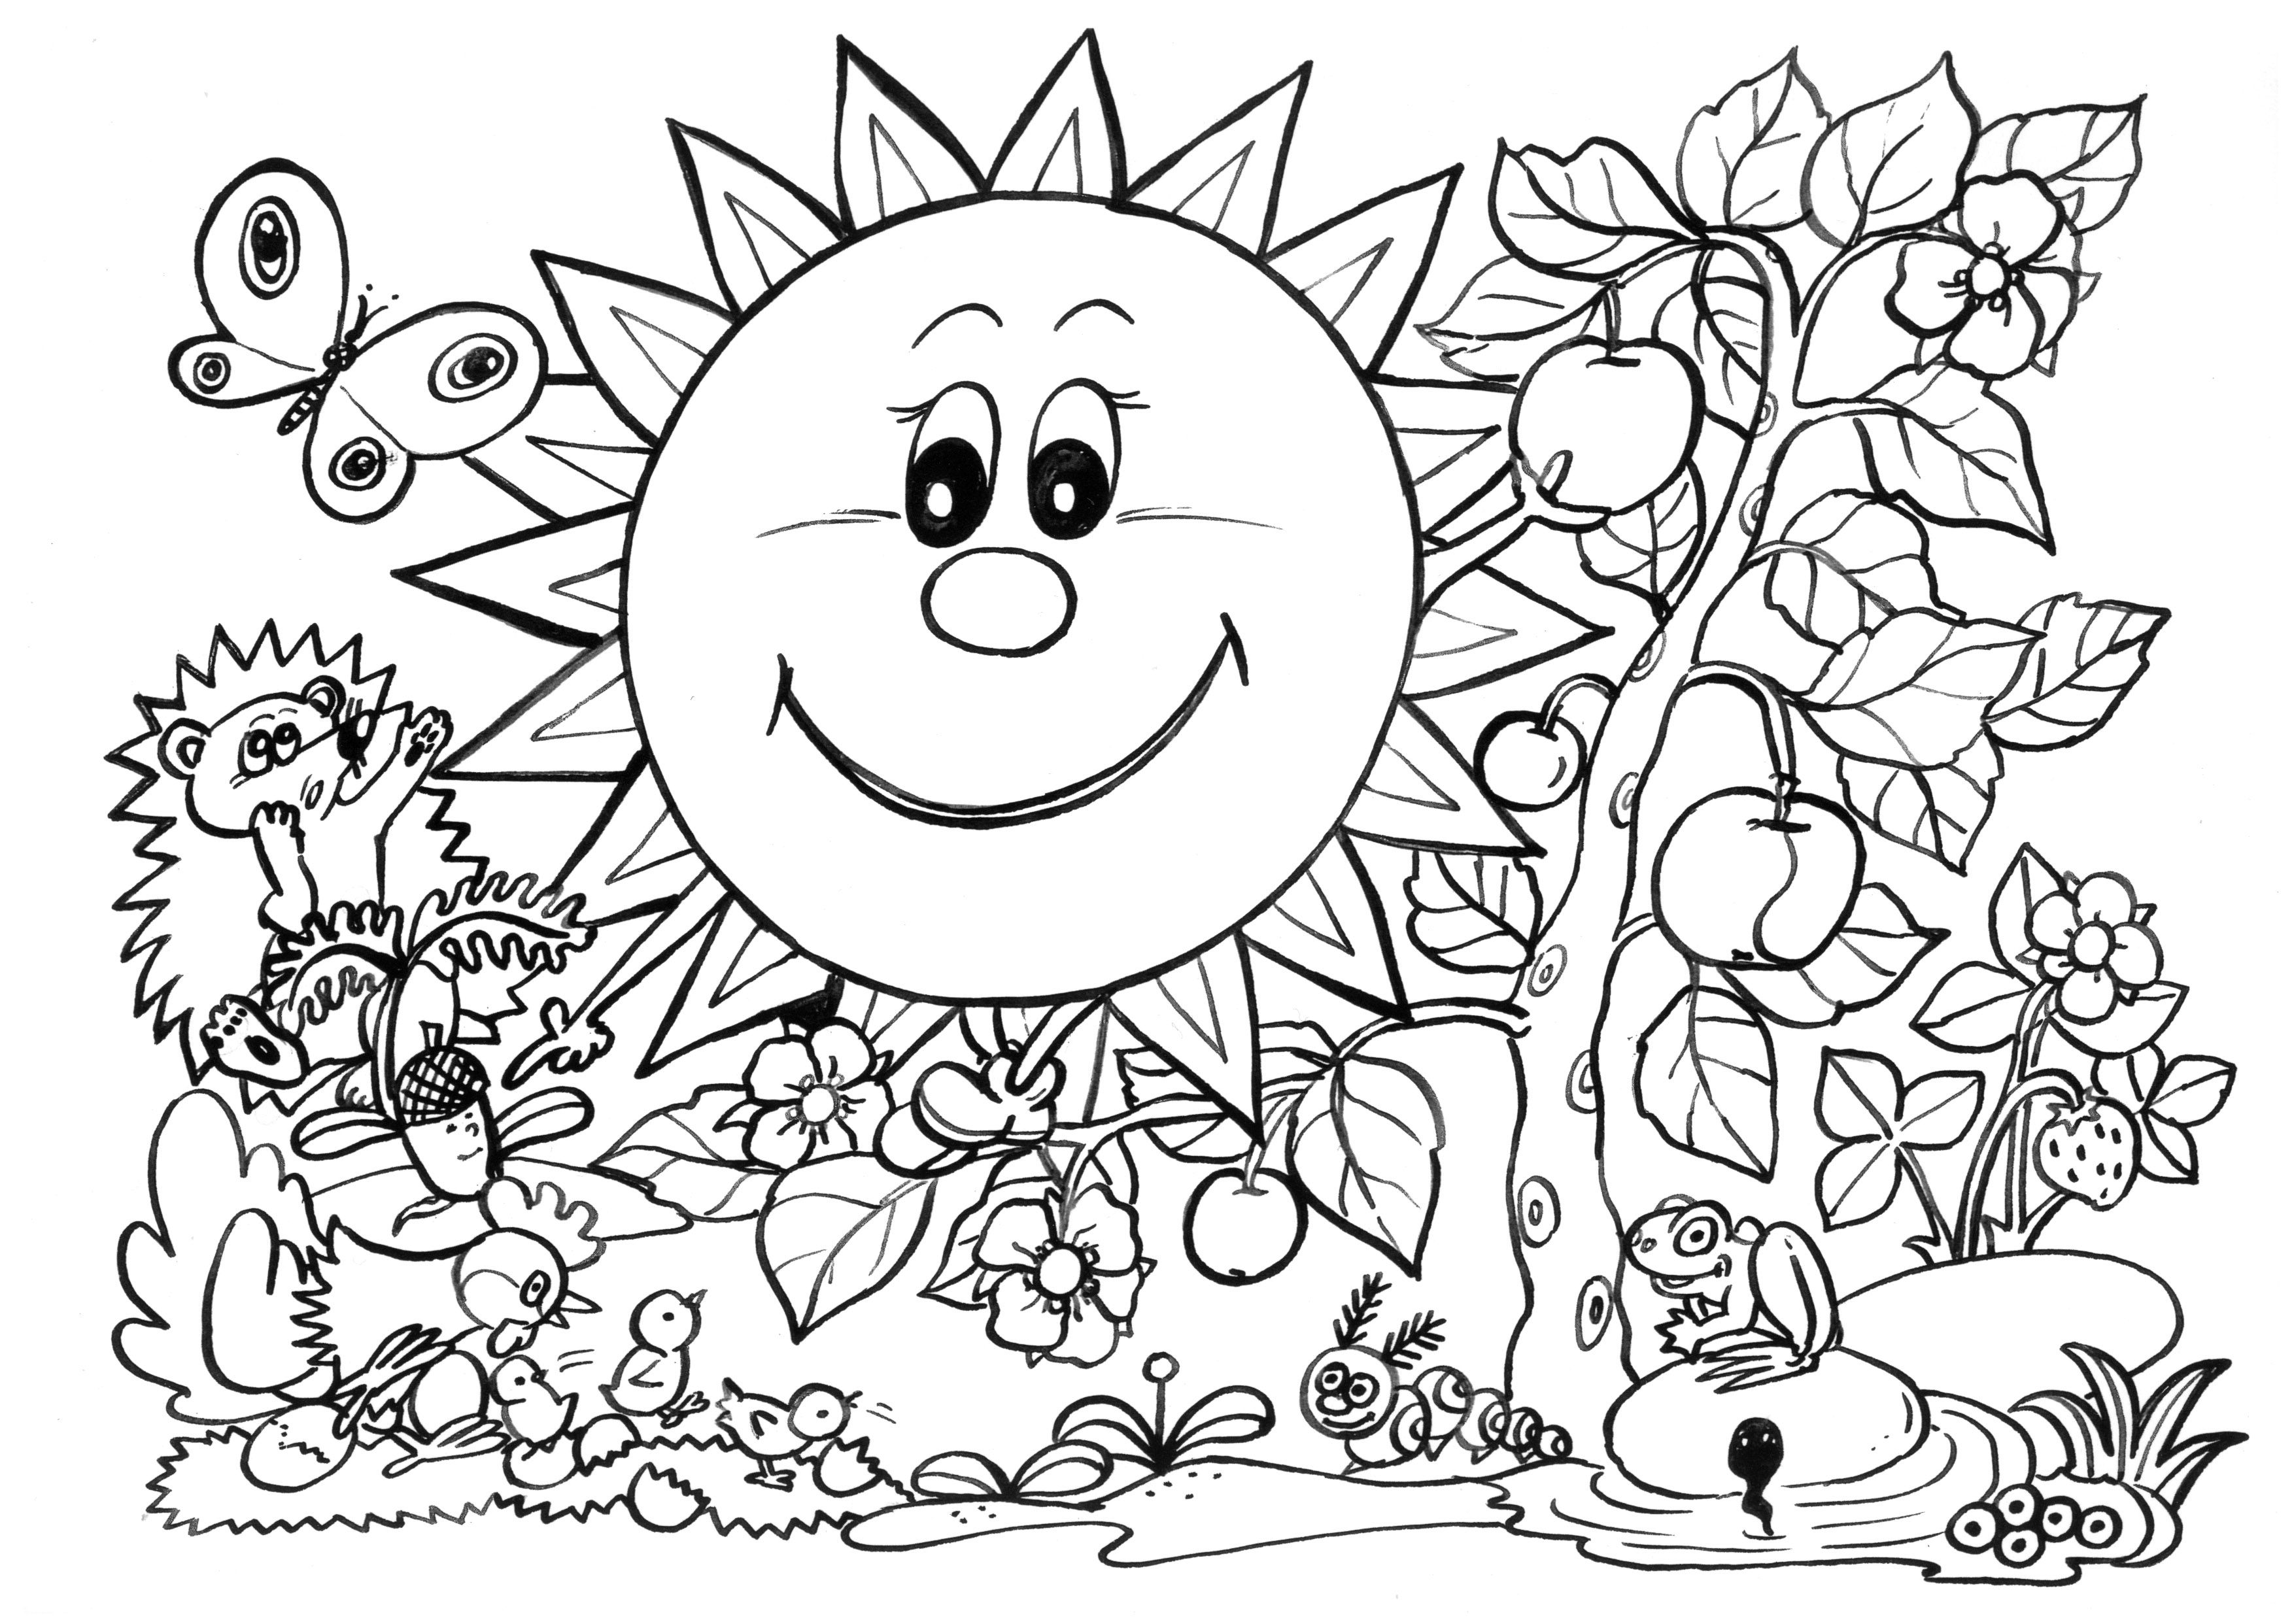 Coloring Page Break - Coloring Pages For All Ages